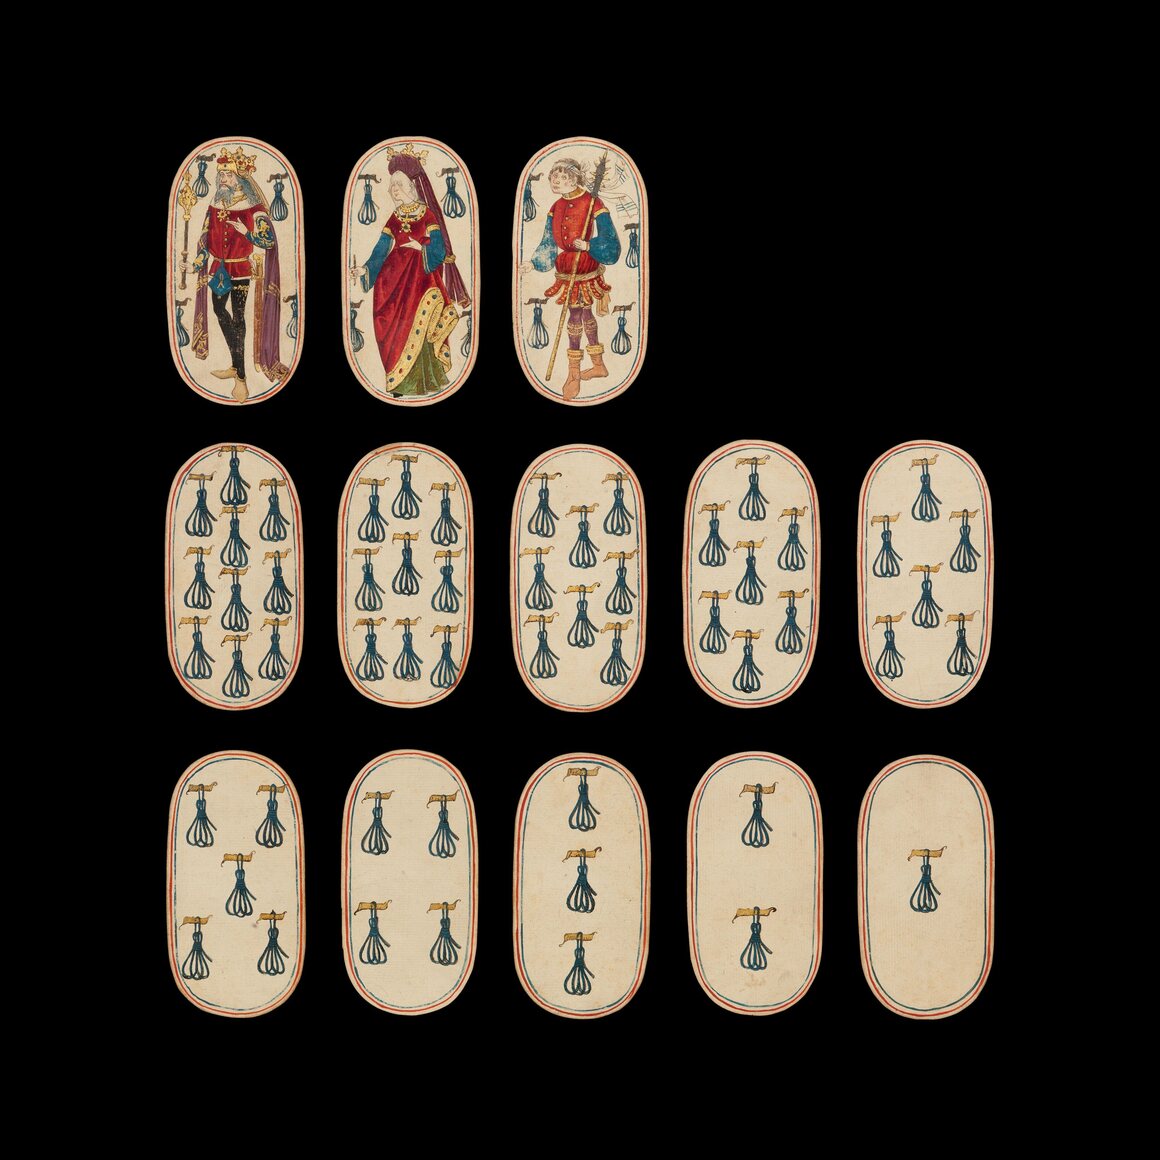 Cards from the Cloisters Deck, from the 15th century.